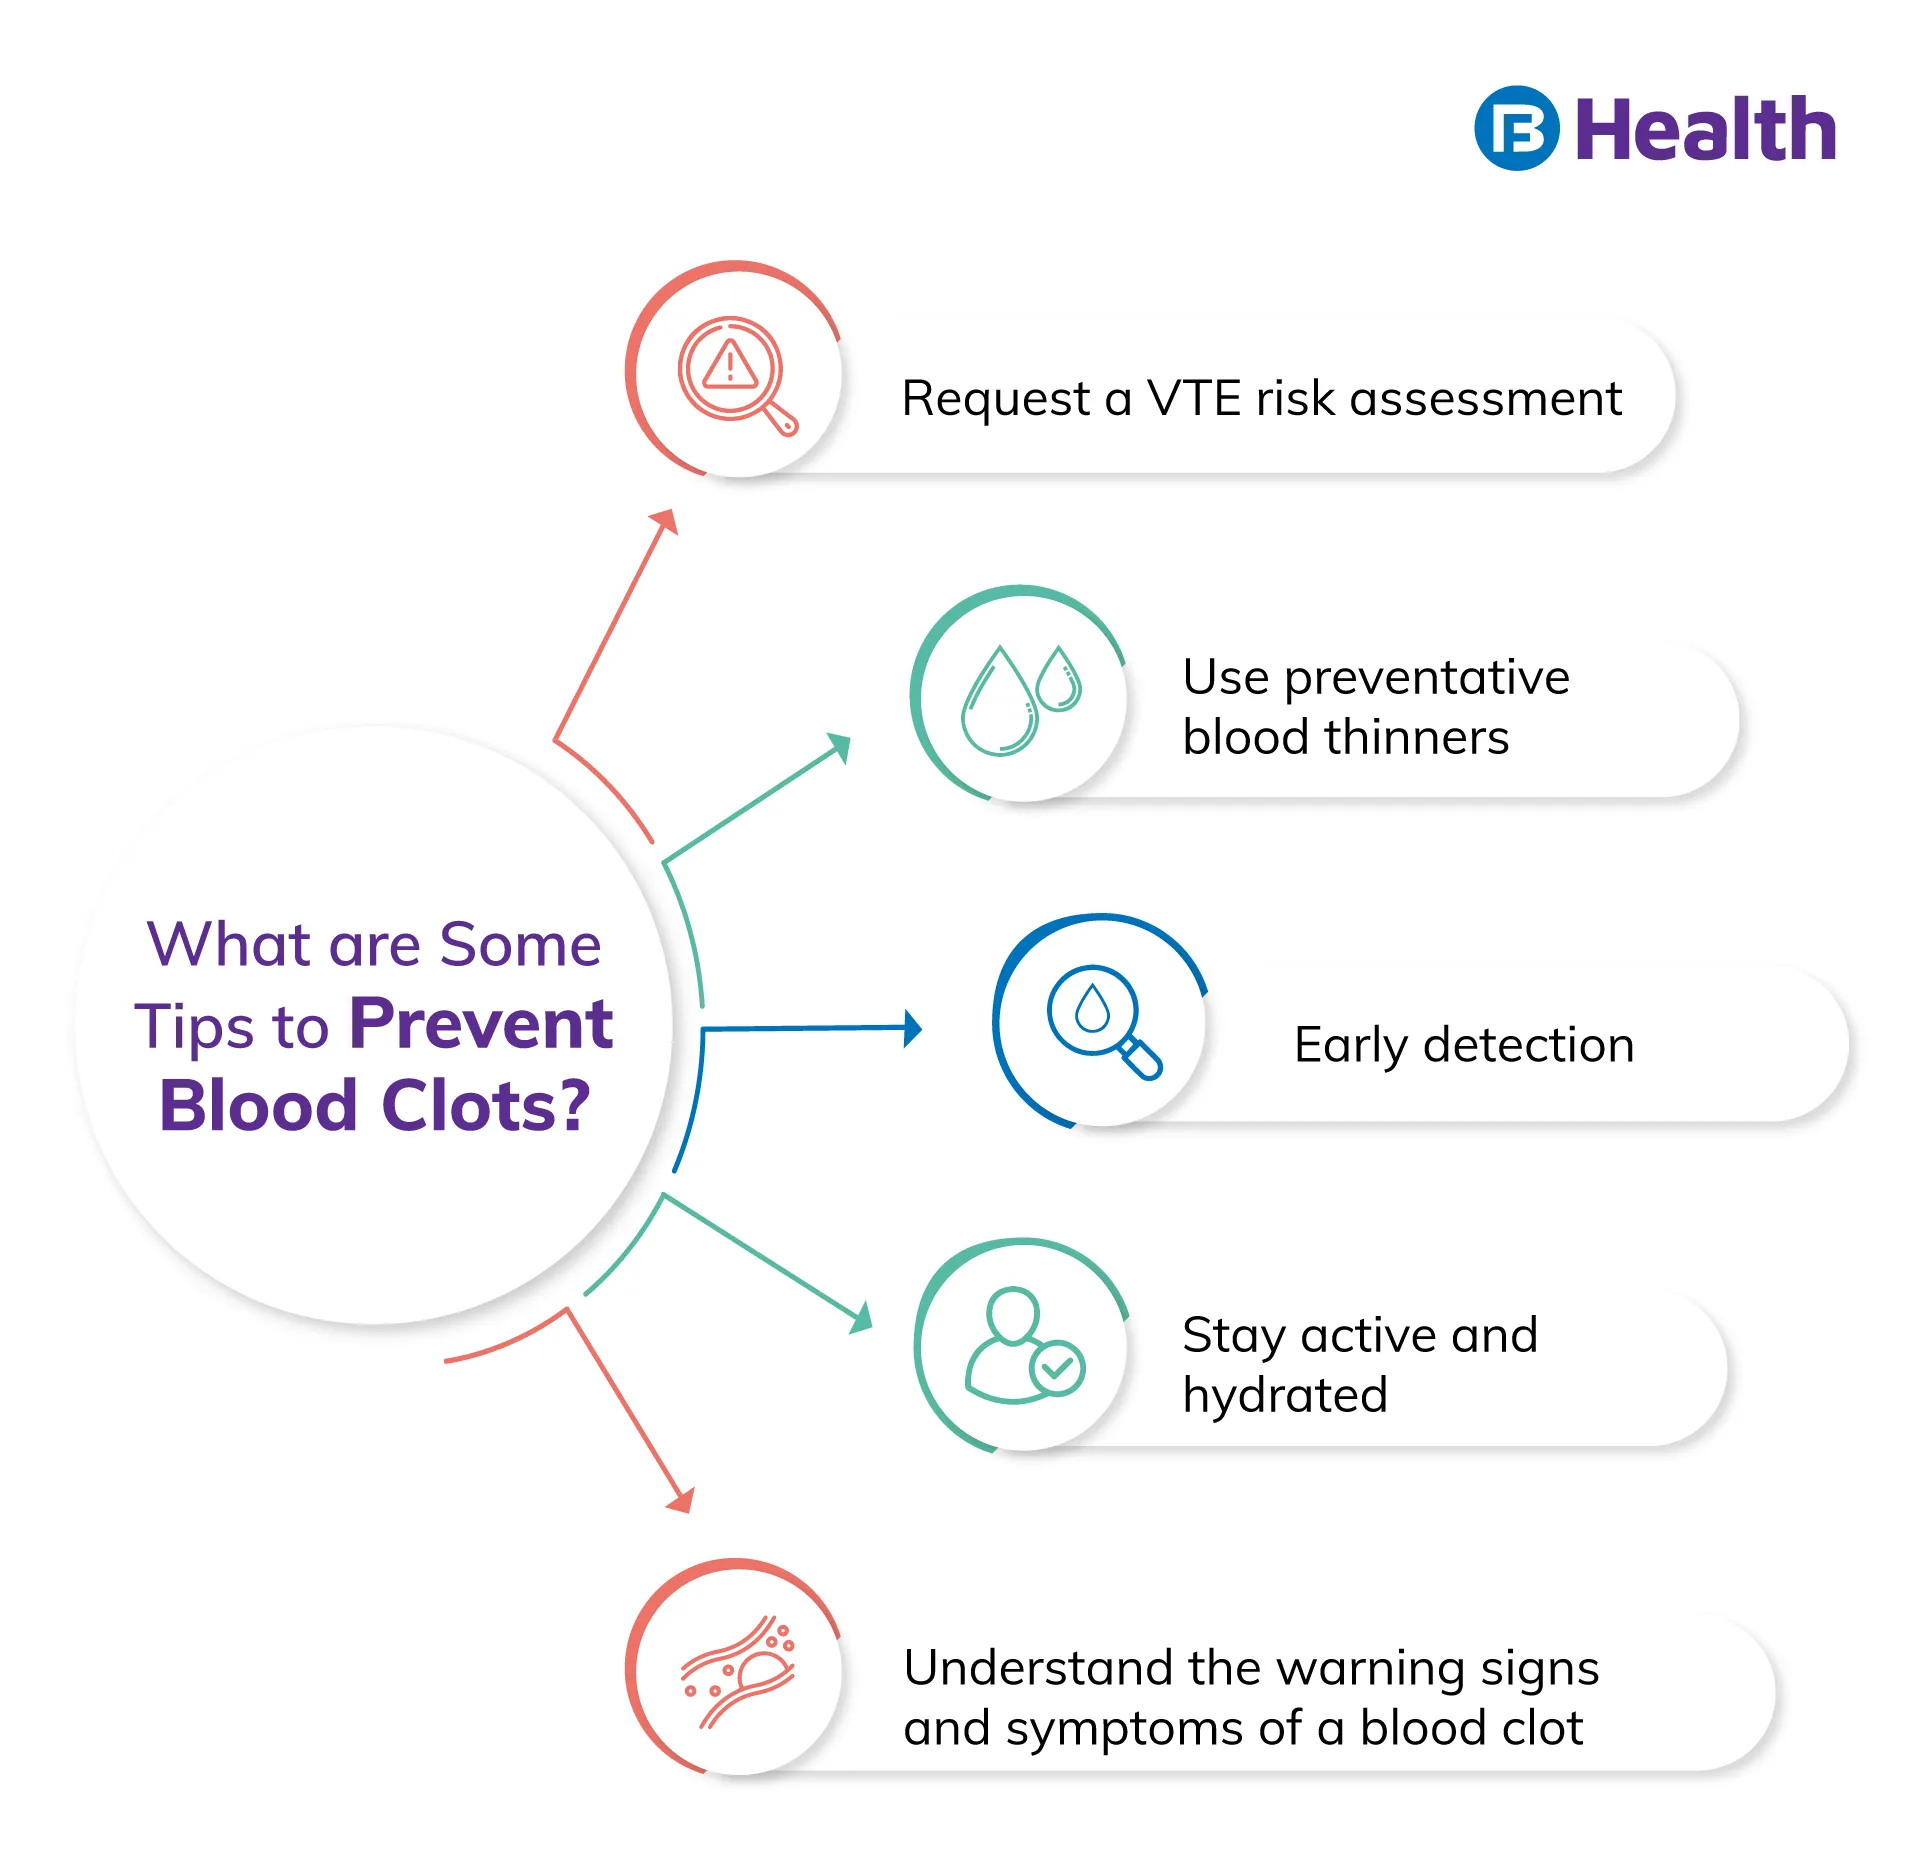 World Thrombosis Day - how to prevent blood clots